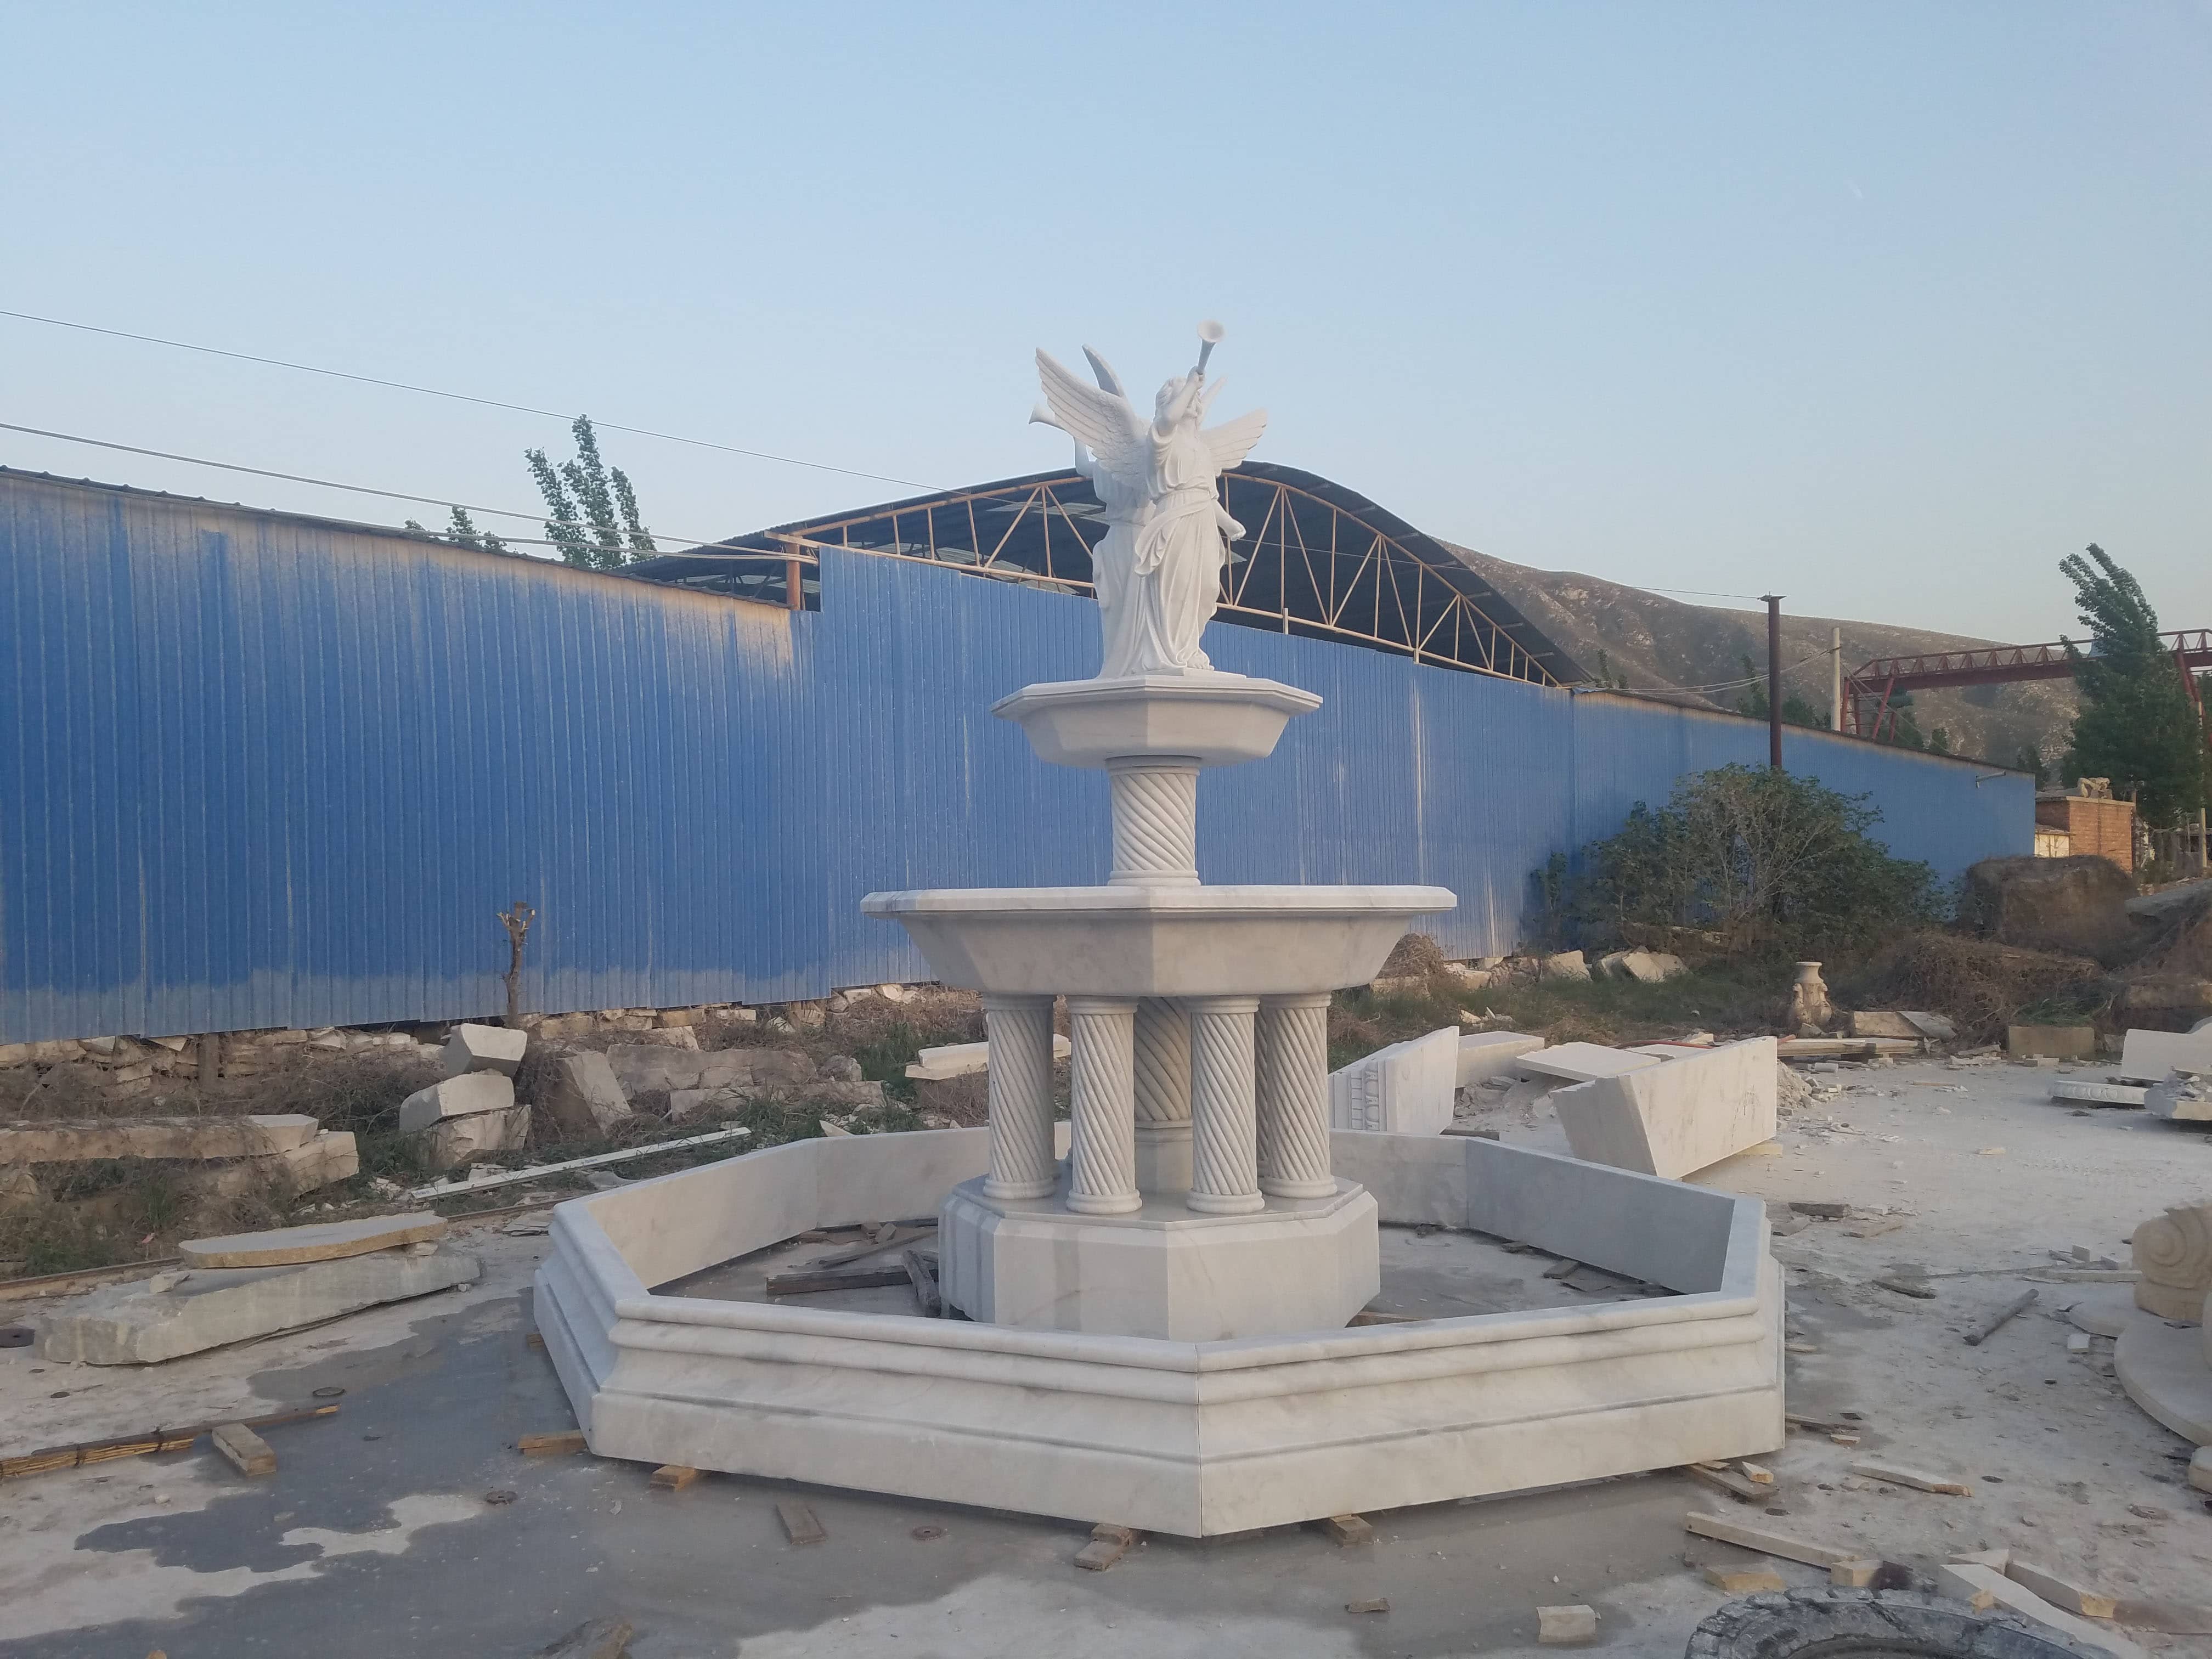 Australian Client Ordered 6M Large Marble Water Fountain With Statues